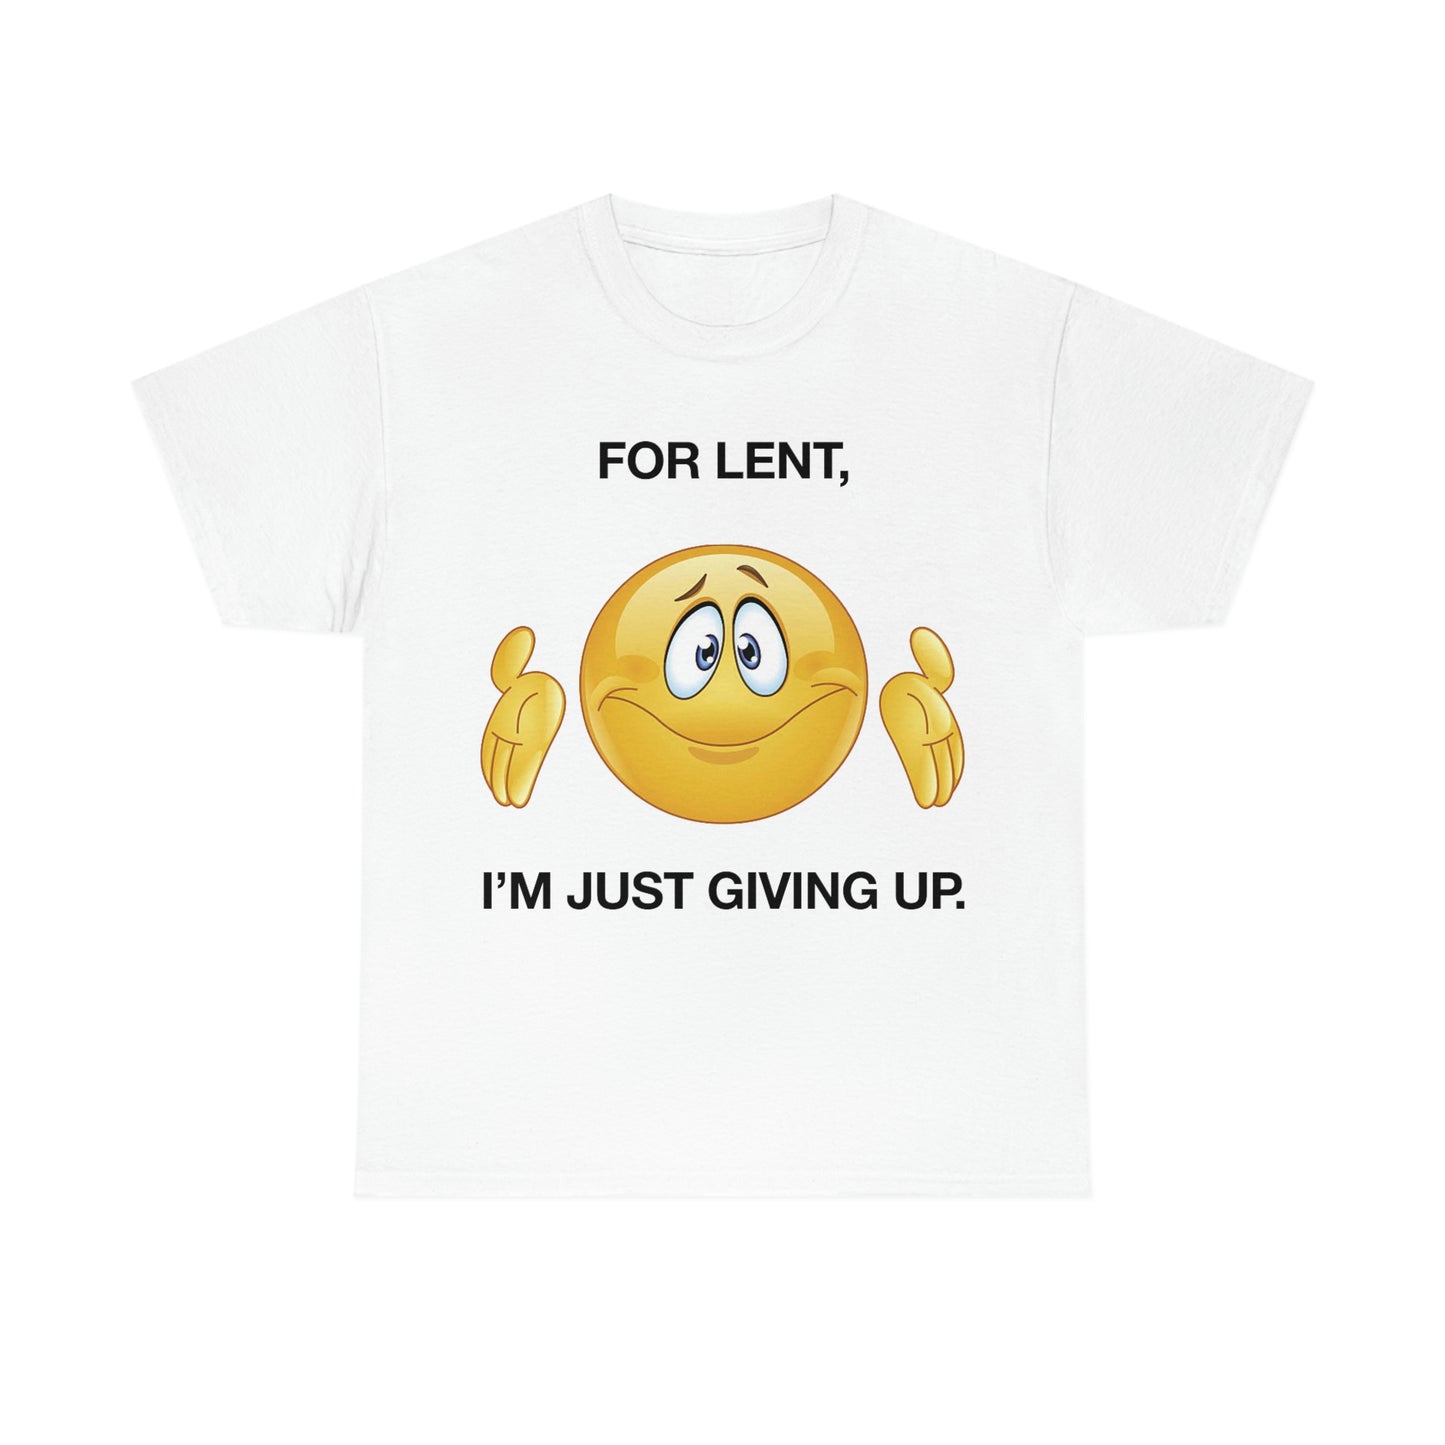 For Lent, I'm Giving Up.